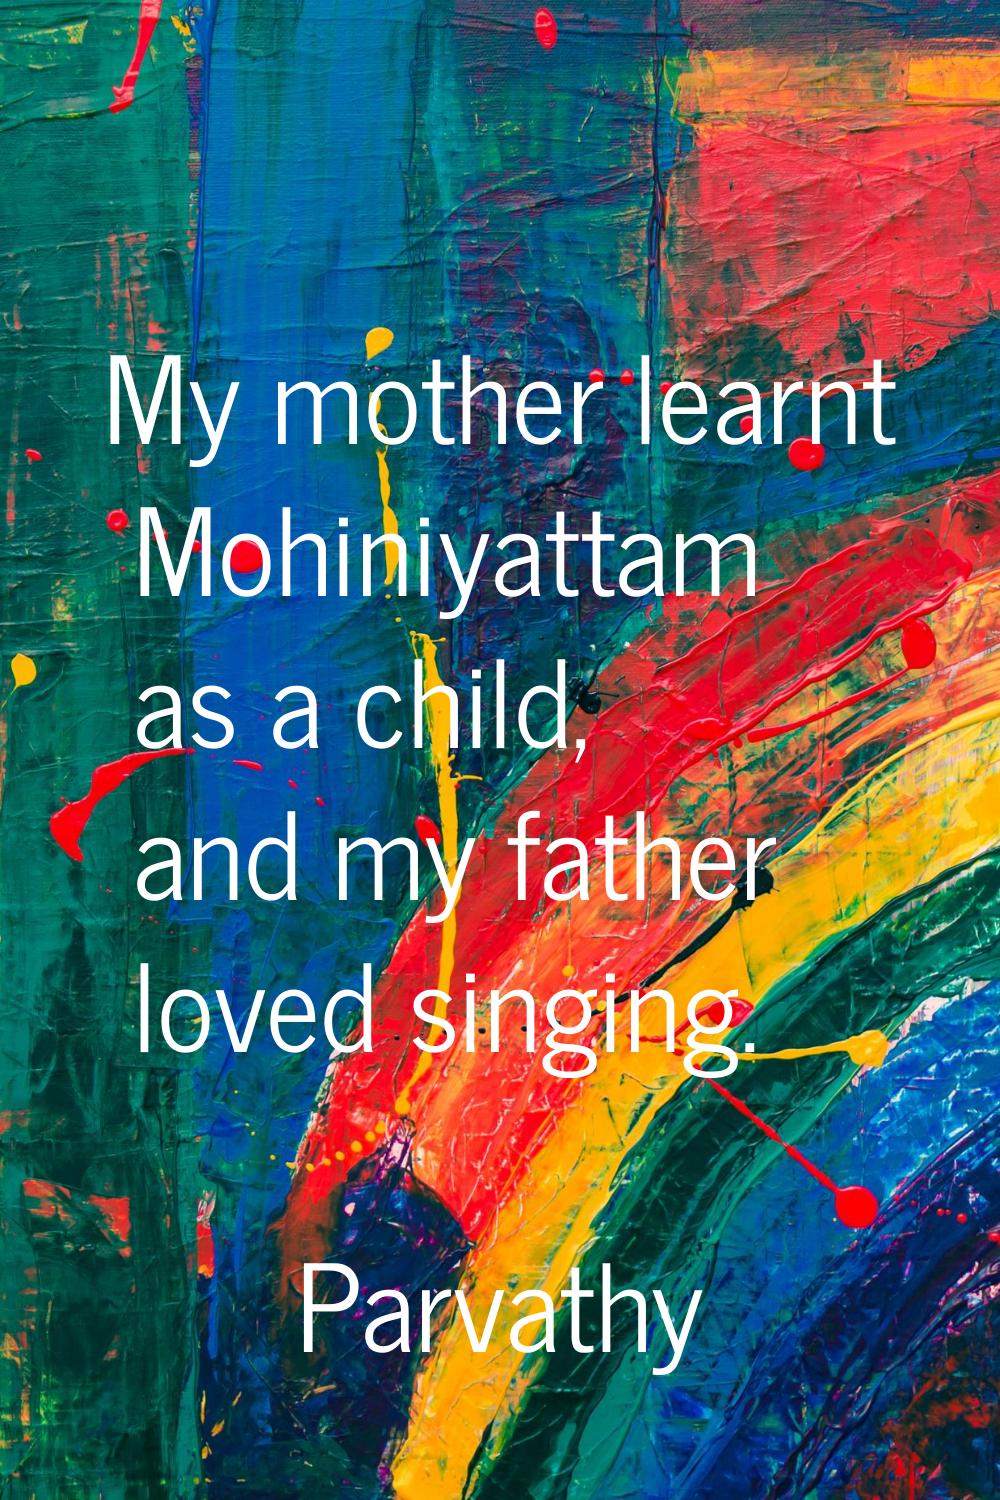 My mother learnt Mohiniyattam as a child, and my father loved singing.